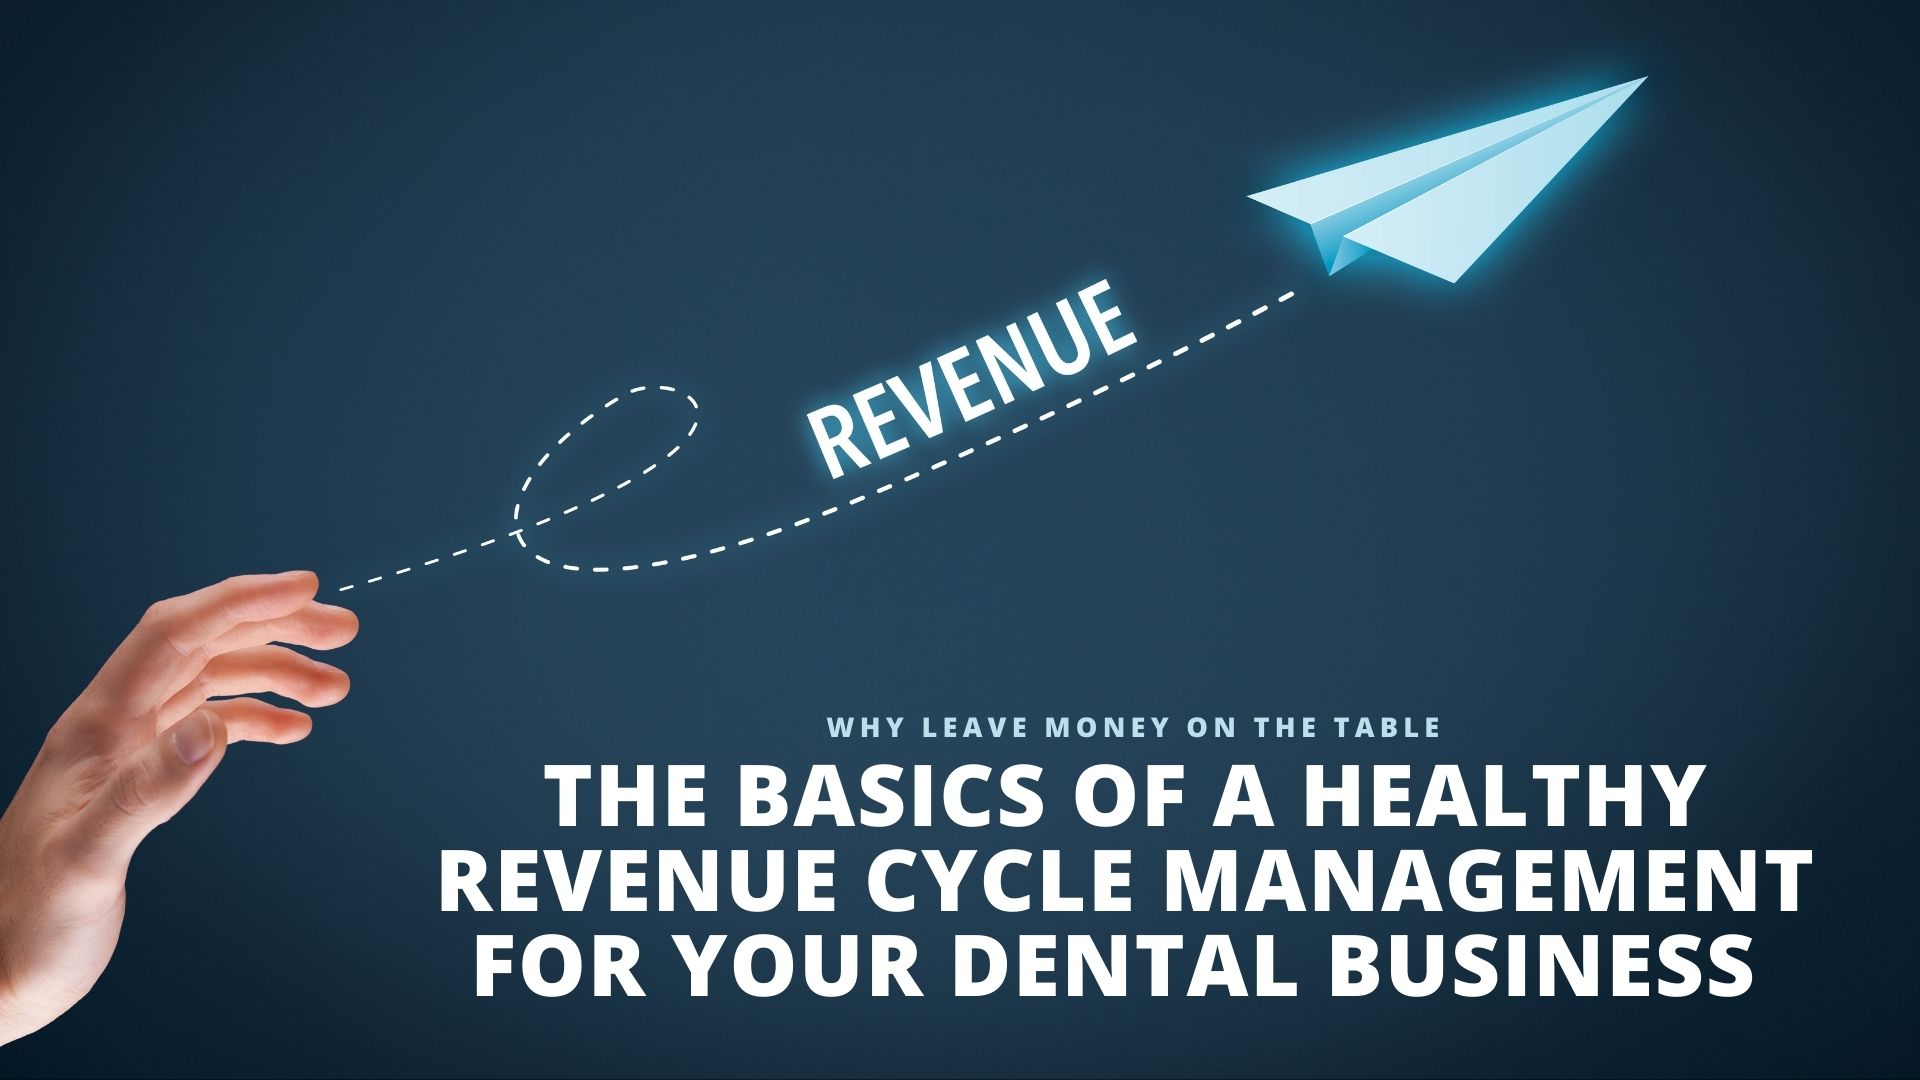 The Basics of a Healthy RCM (Revenue Cycle Management) System for Your Dental Practice or DSO